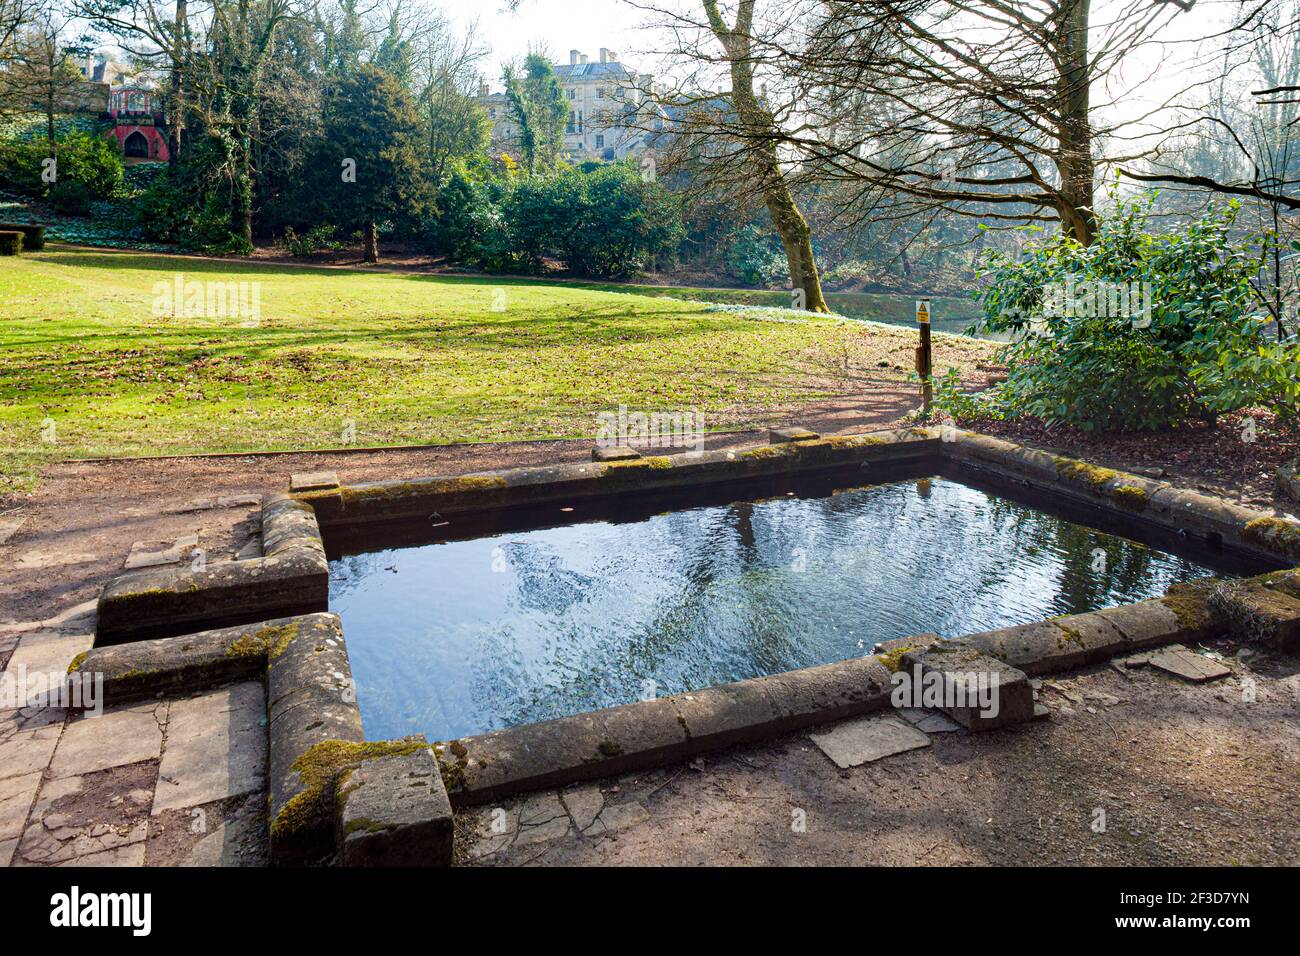 The Plunge Pool at Painswick Rococo Garden, Painswick, Gloucestershire UK Foto Stock